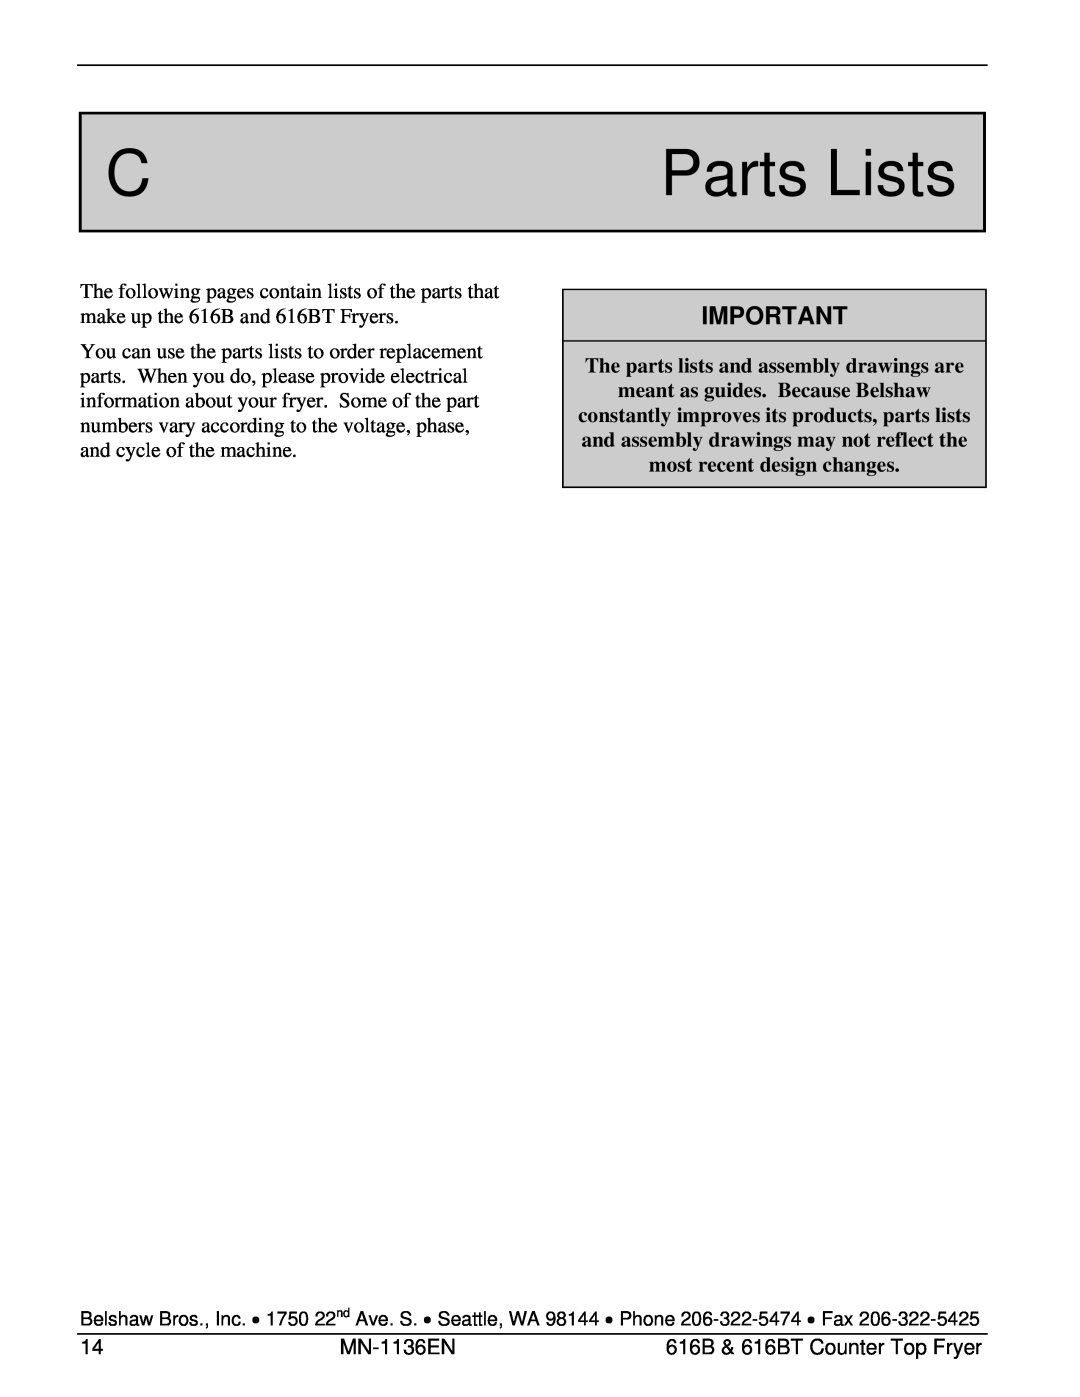 Belshaw Brothers 616BT manual Parts Lists 